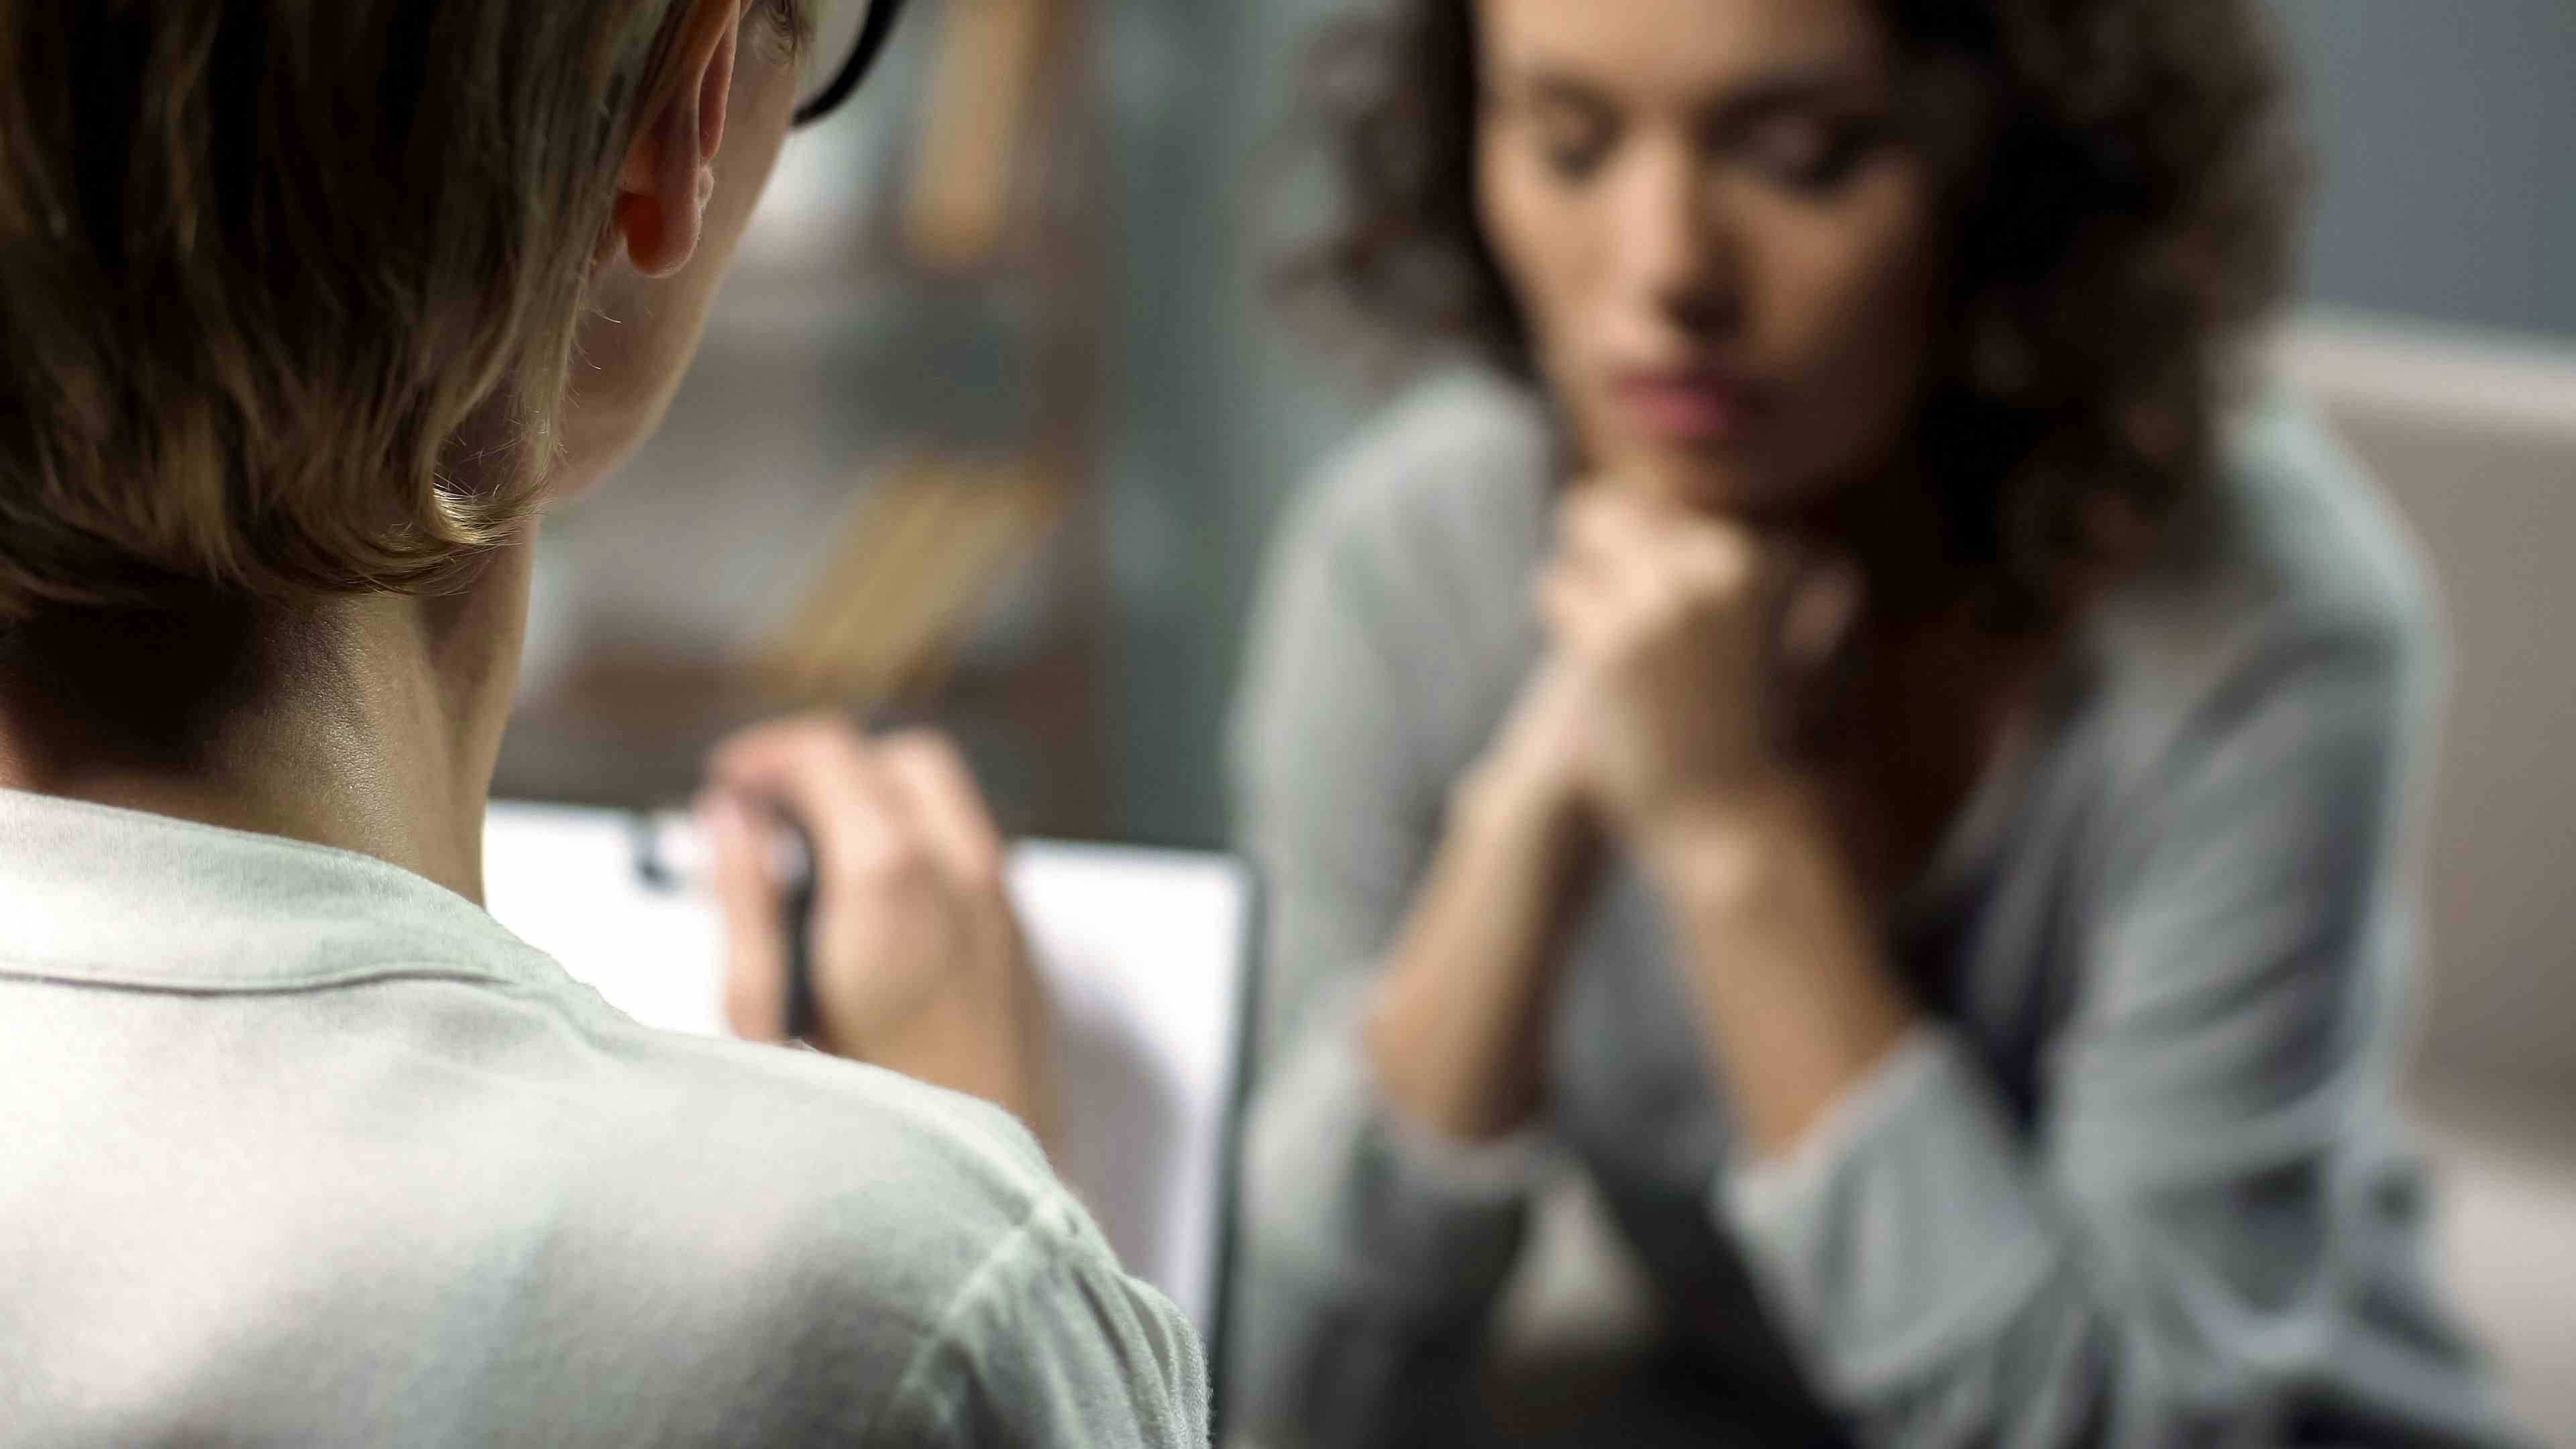 Image credit: motortion | stock.adobe.com - Young depressed woman talking to lady psychologist during session, mental health